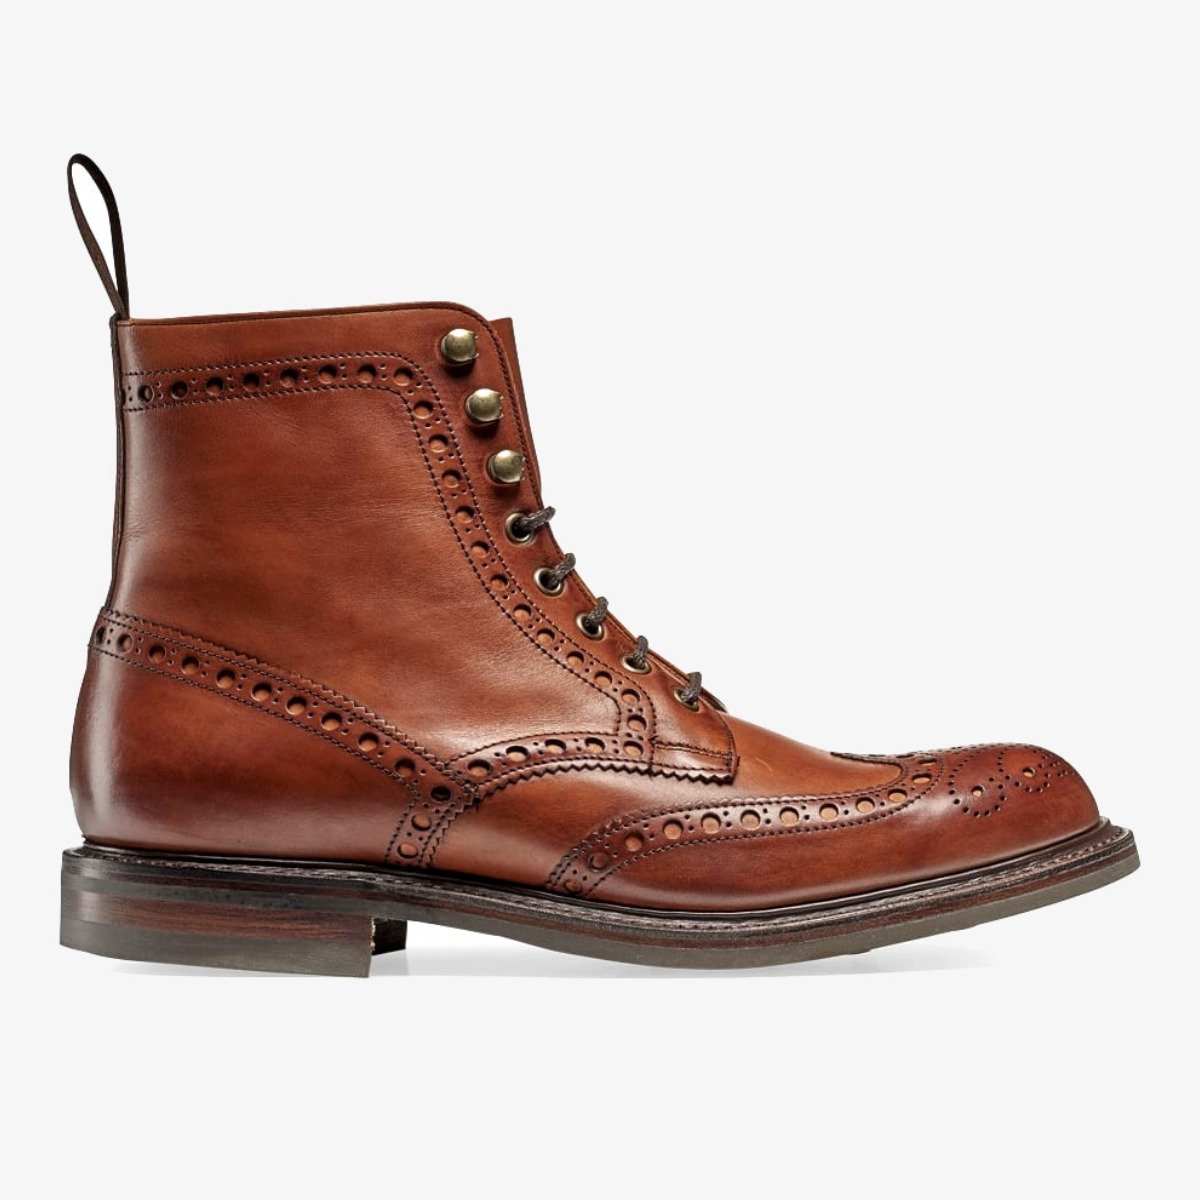 Cheaney Tweed dark leaf brogue lace up boots